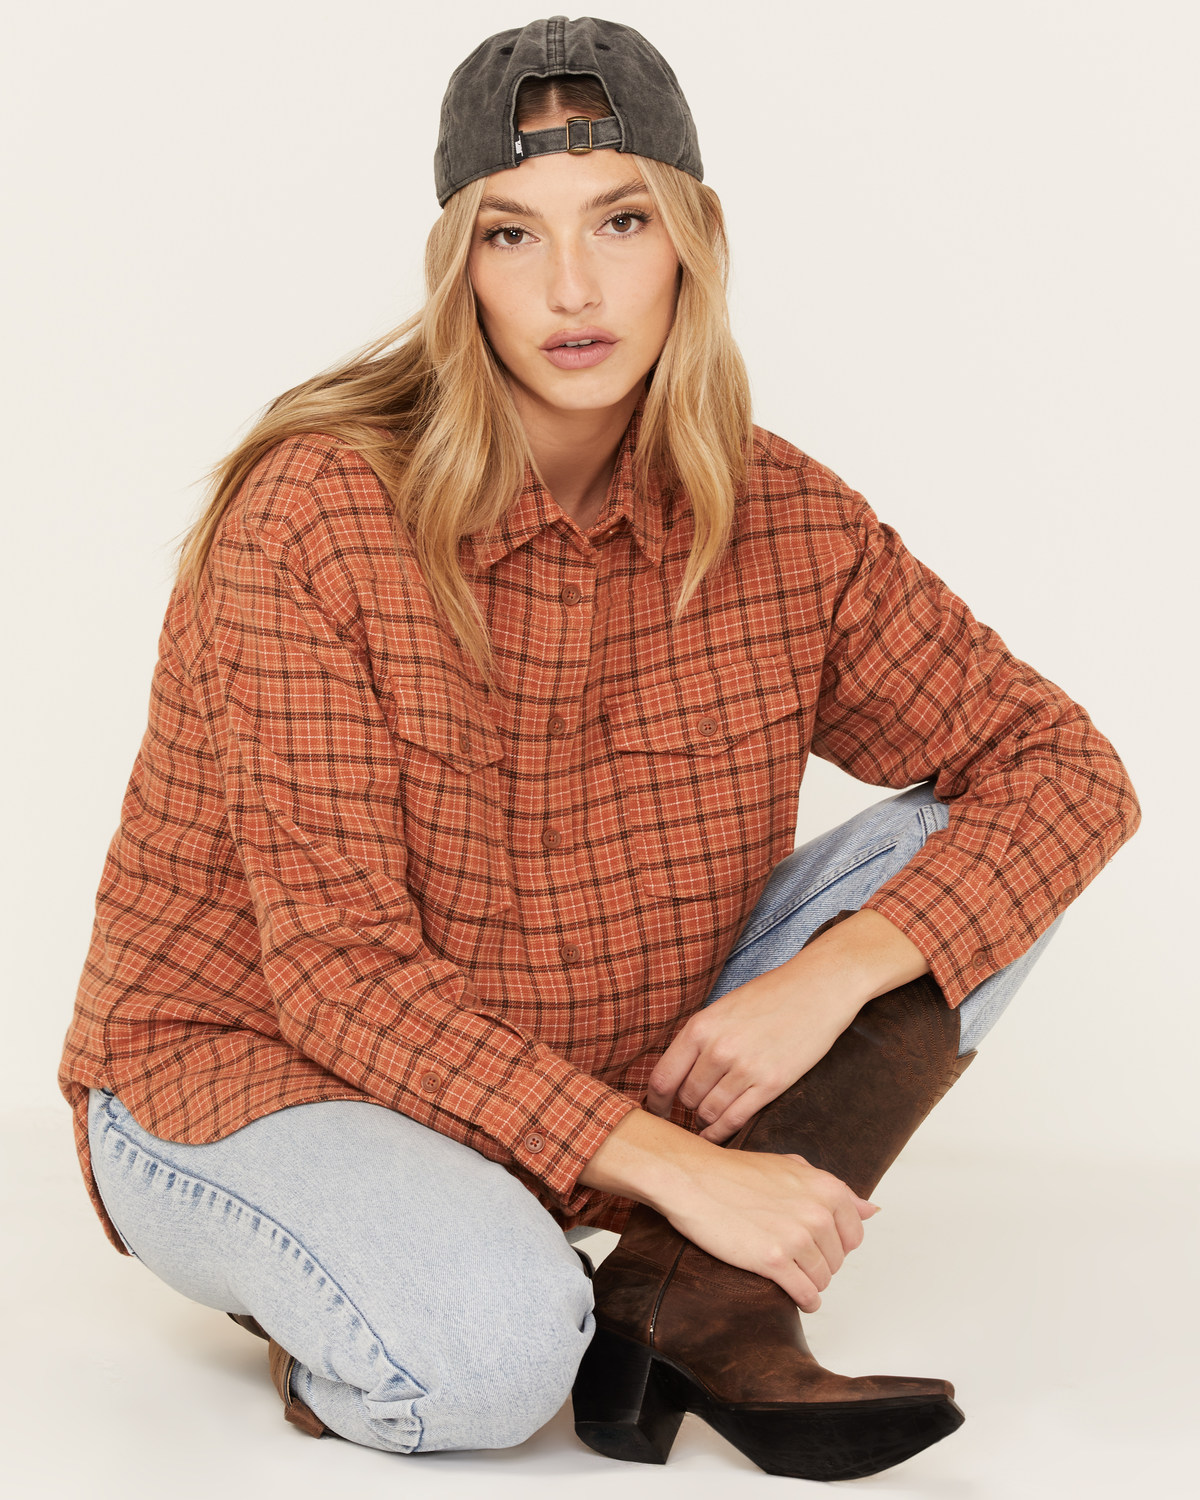 Cleo + Wolf Women's Plaid Print Oversized Long Sleeve Flannel Button Down Shirt